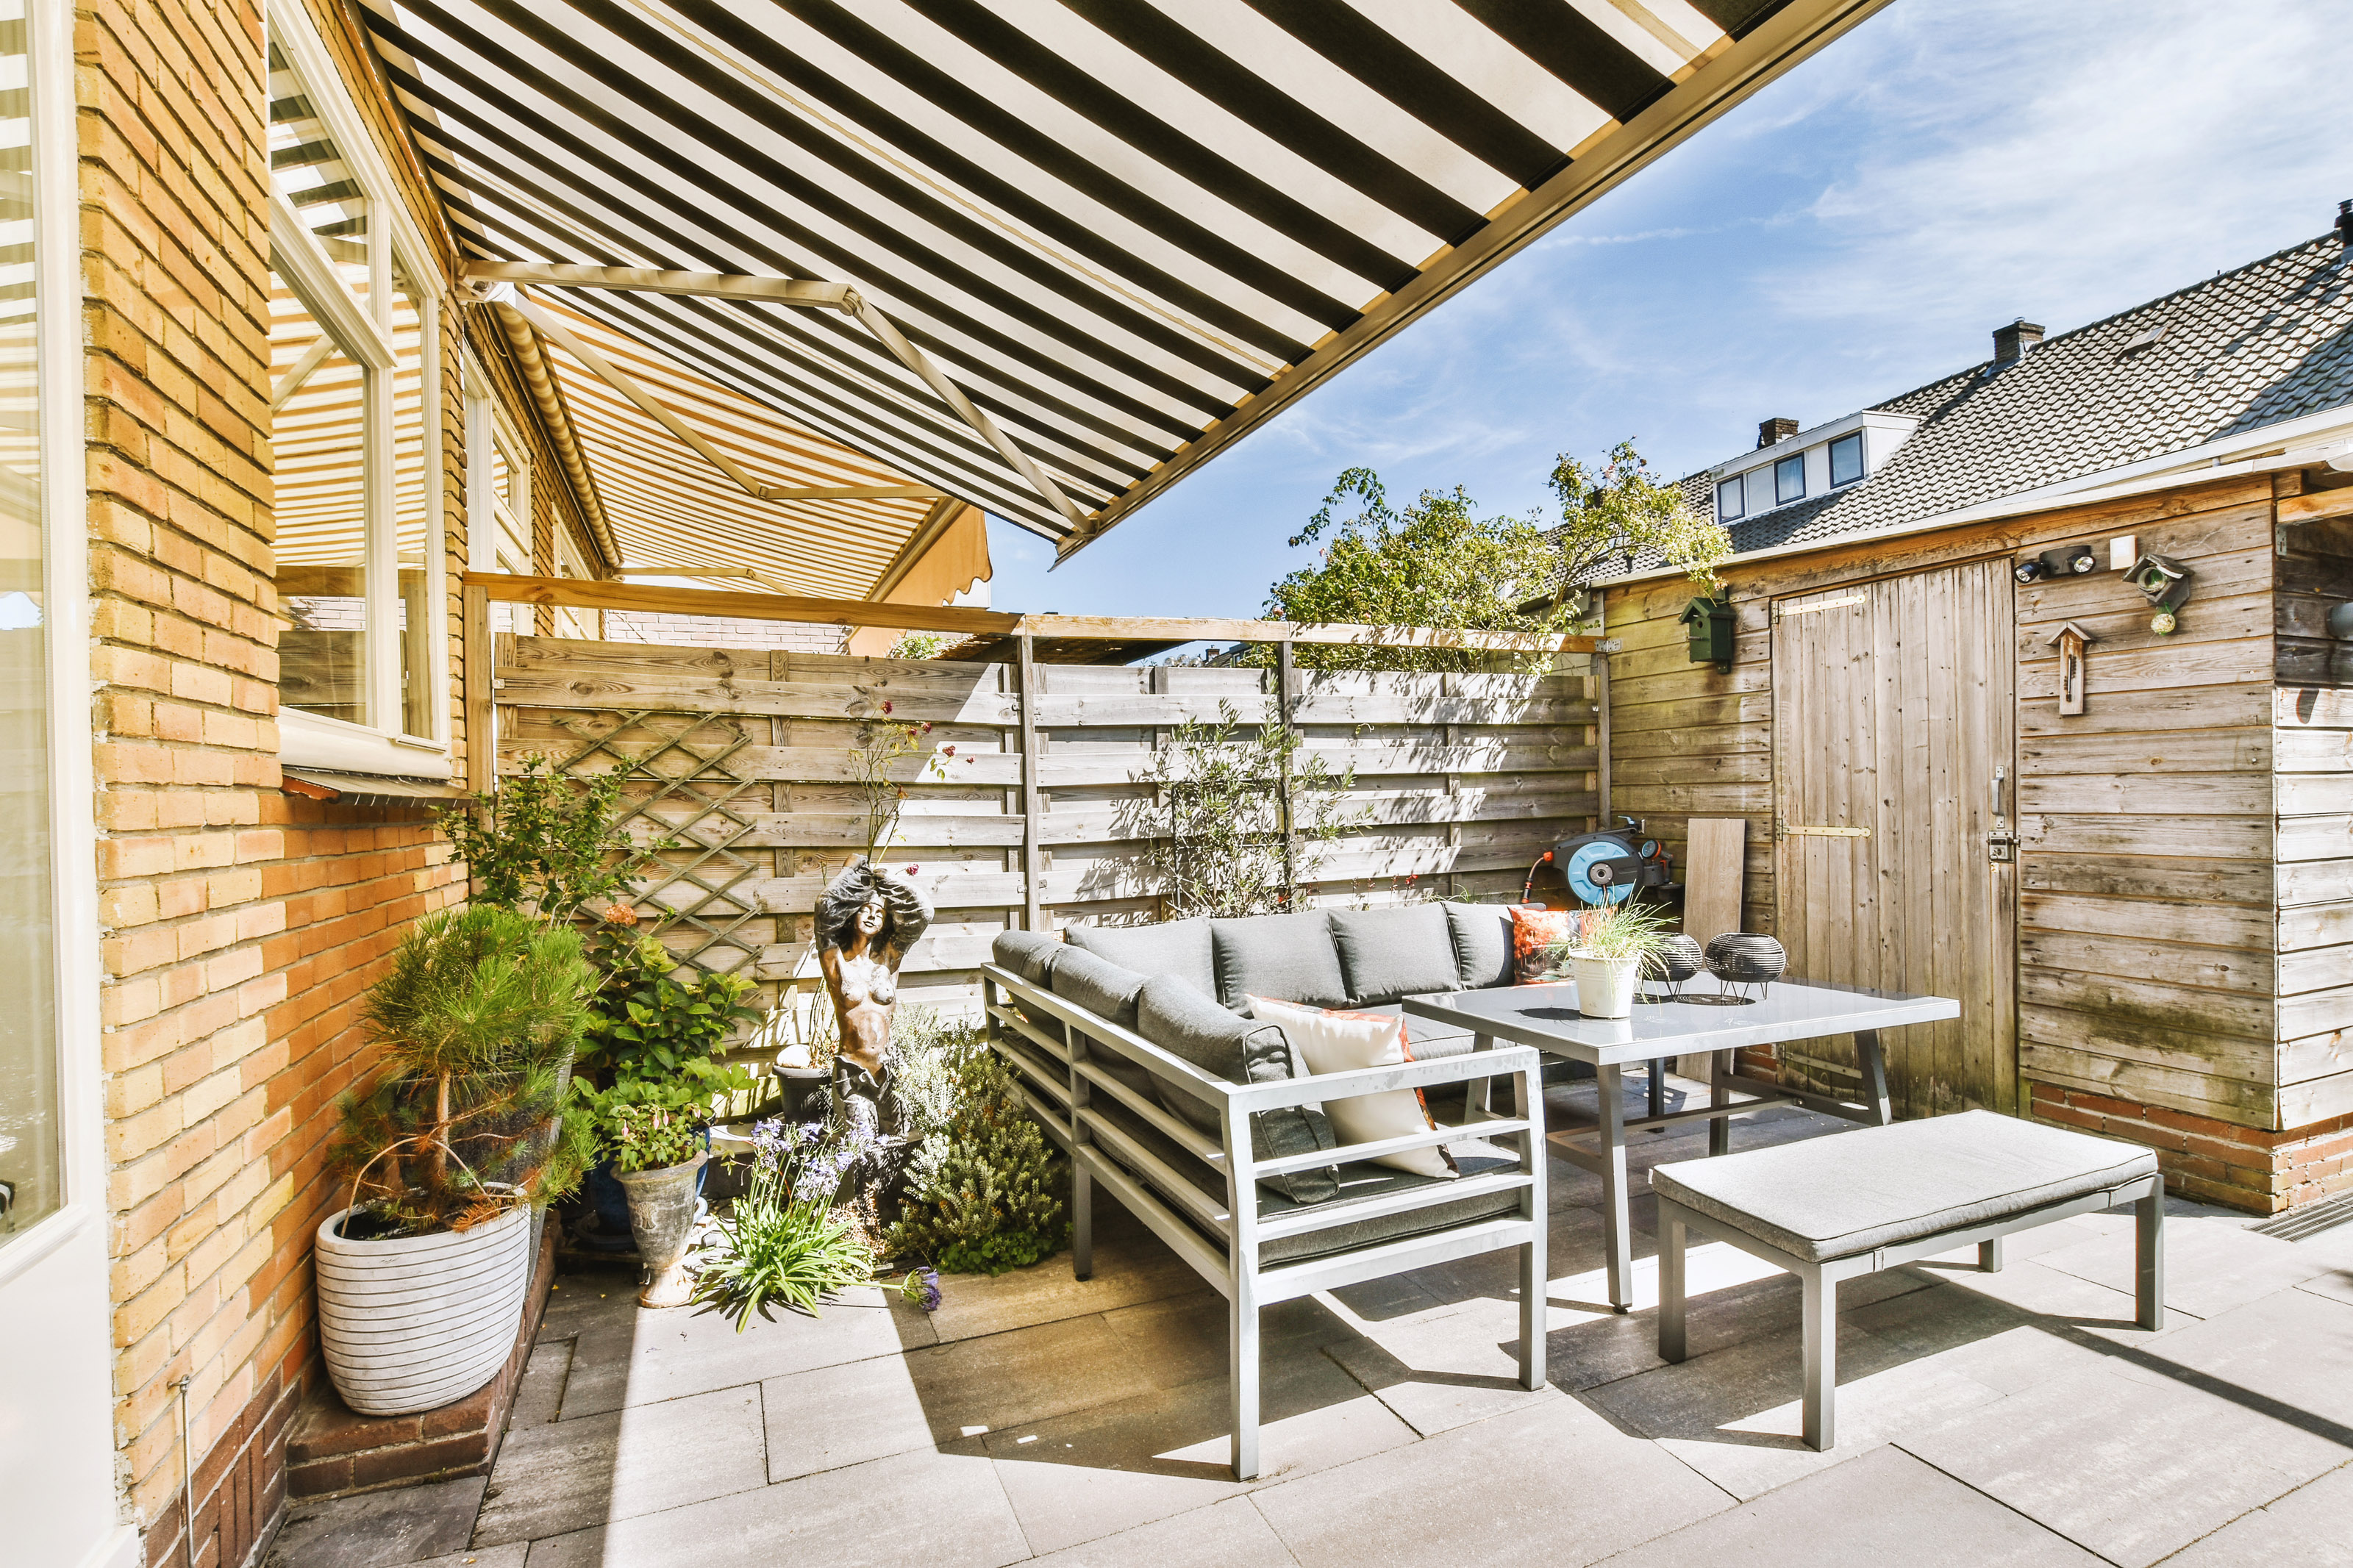 Neat paved patio with sitting area covered by a retractable awning and small garden near wooden privacy fence